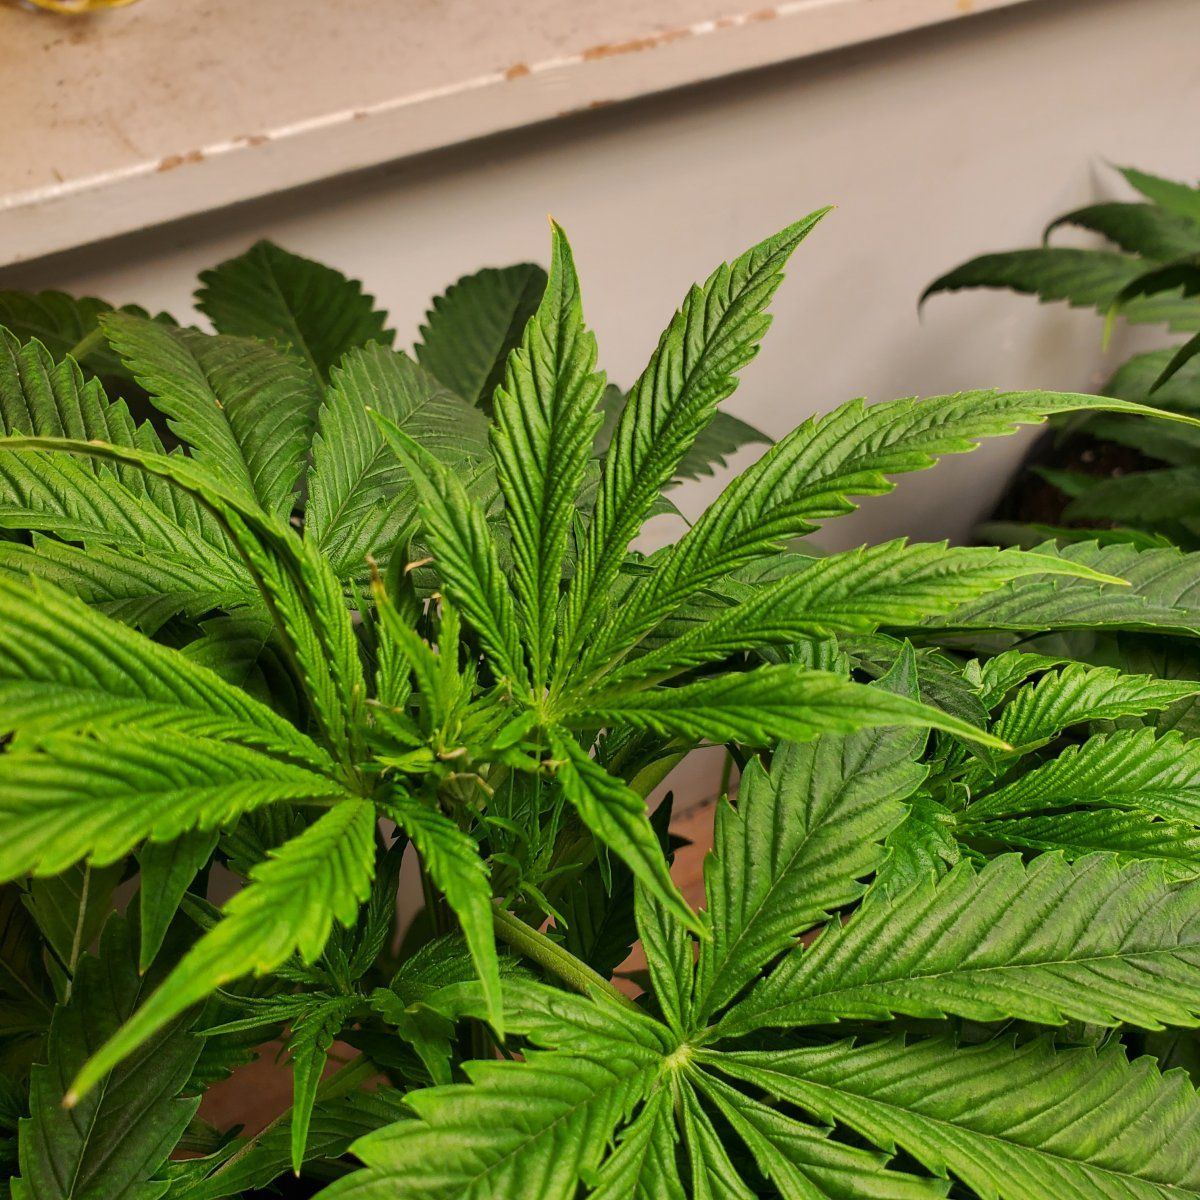 New herewould love advice on 1st indoor growpics  specifics in post 8